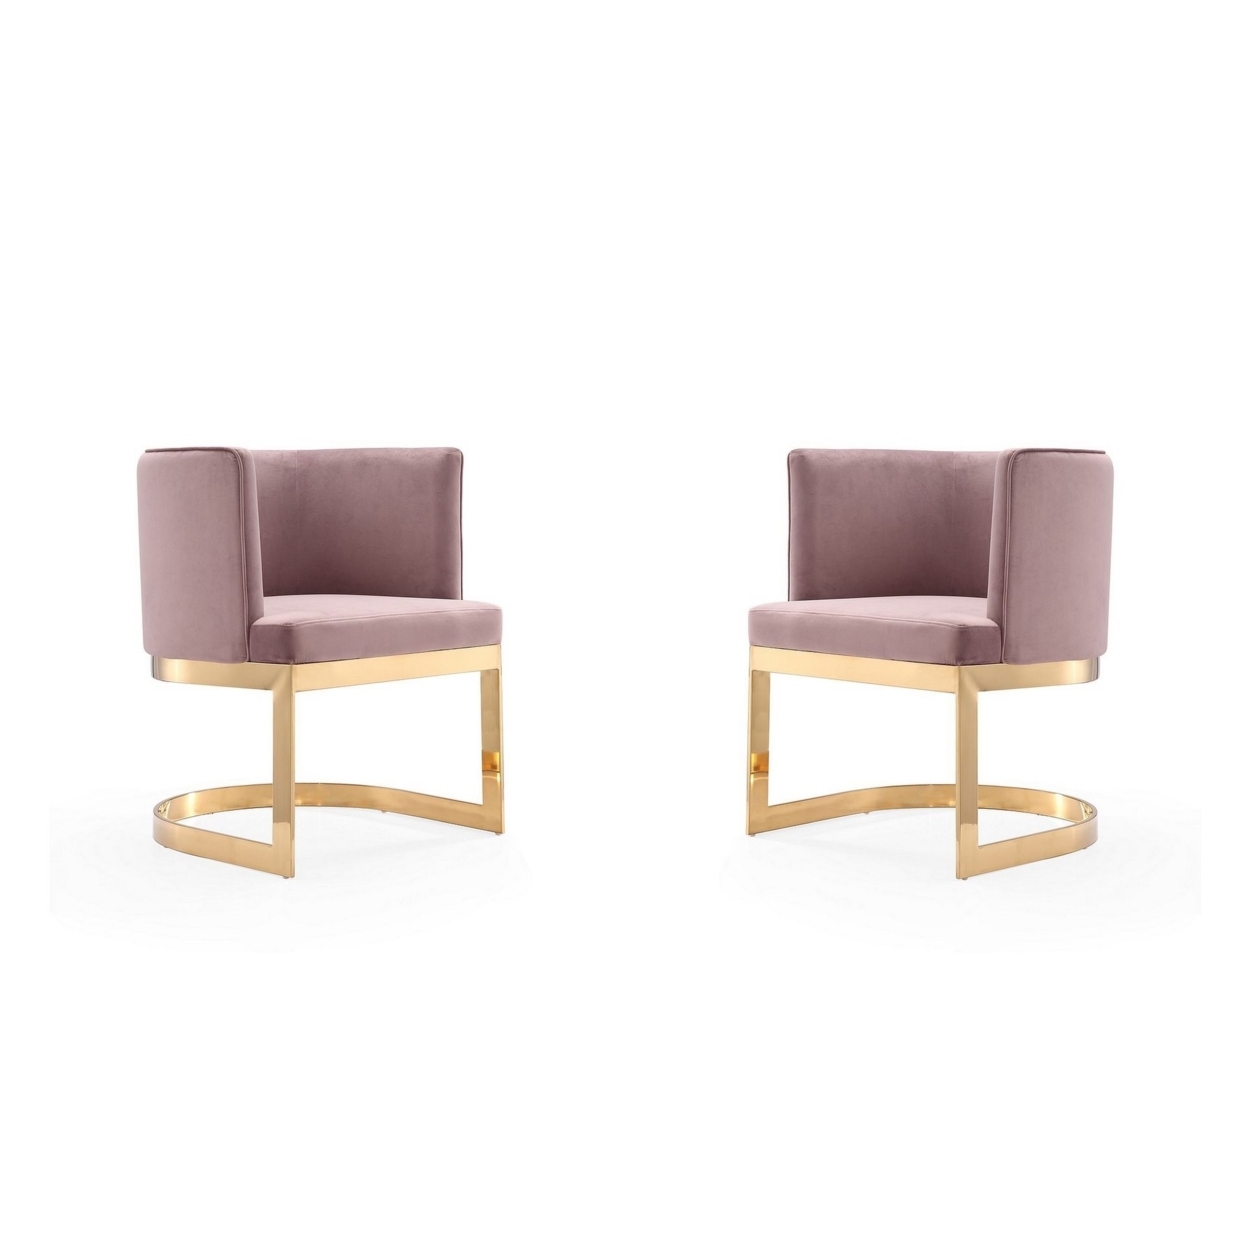 Aura Blush and Polished Brass Velvet Dining Chair (Set of 2)